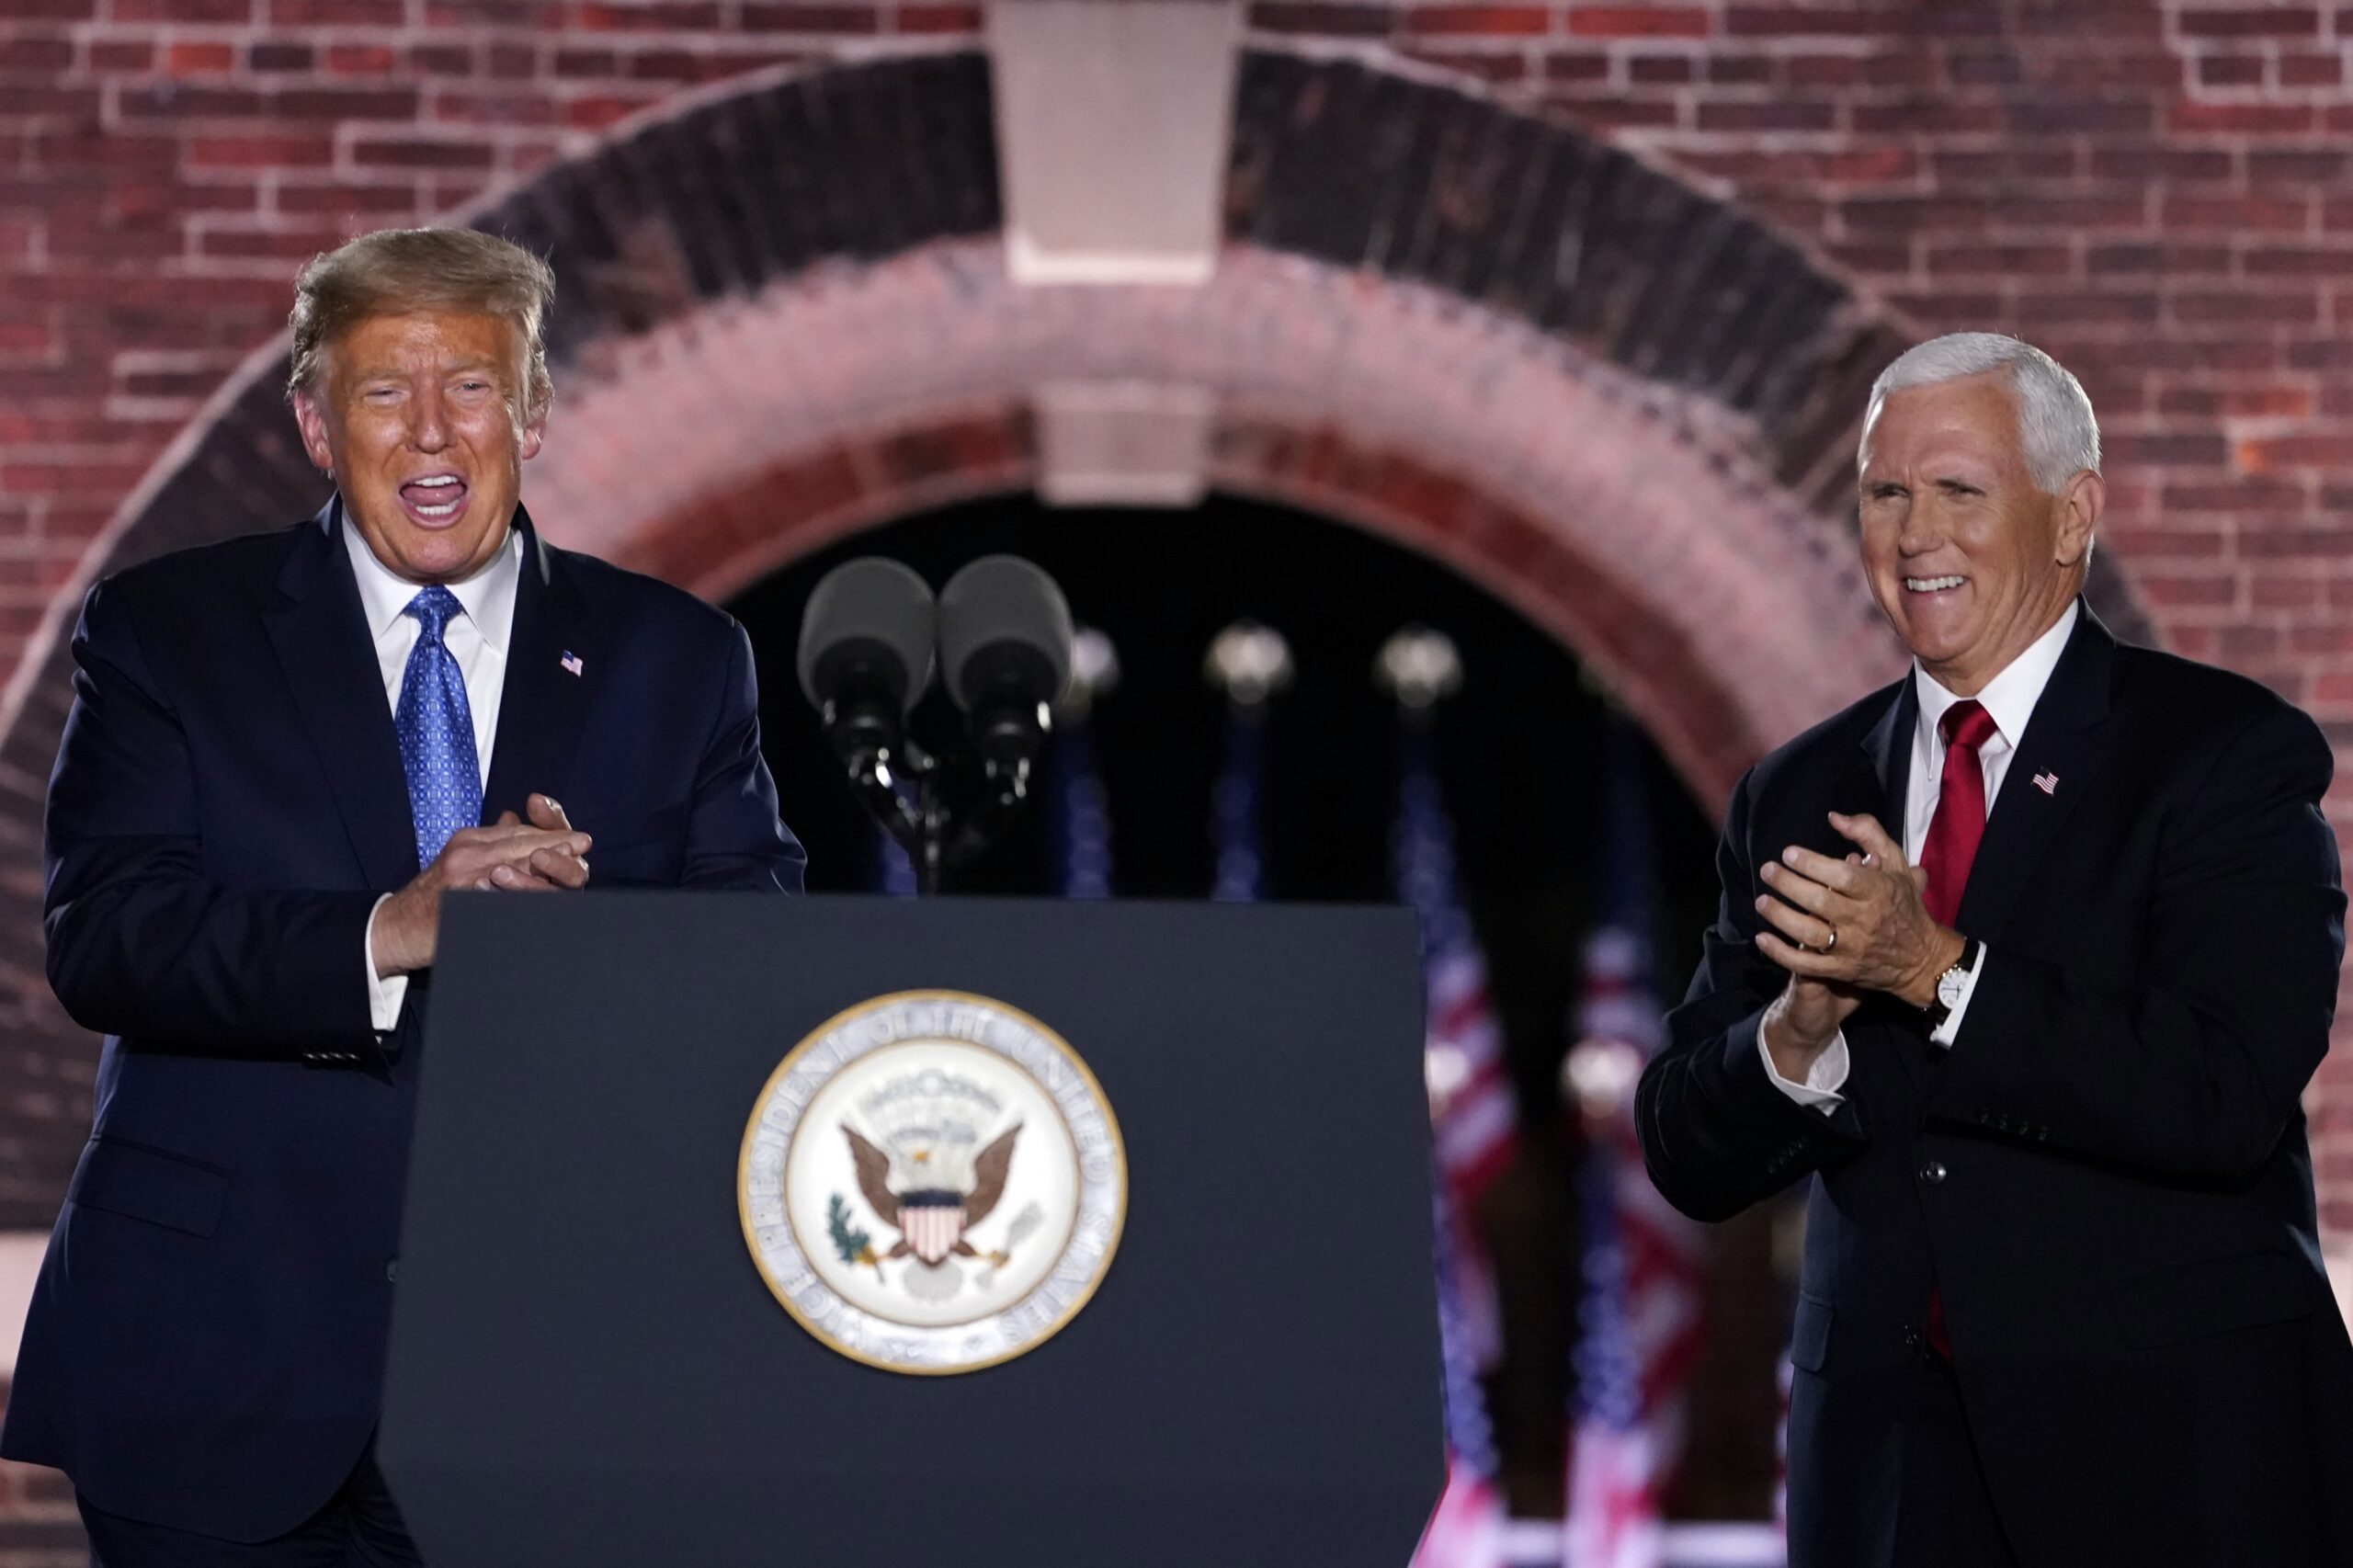 President Donald Trump and Vice President Mike Pence stand on stage at the RNC